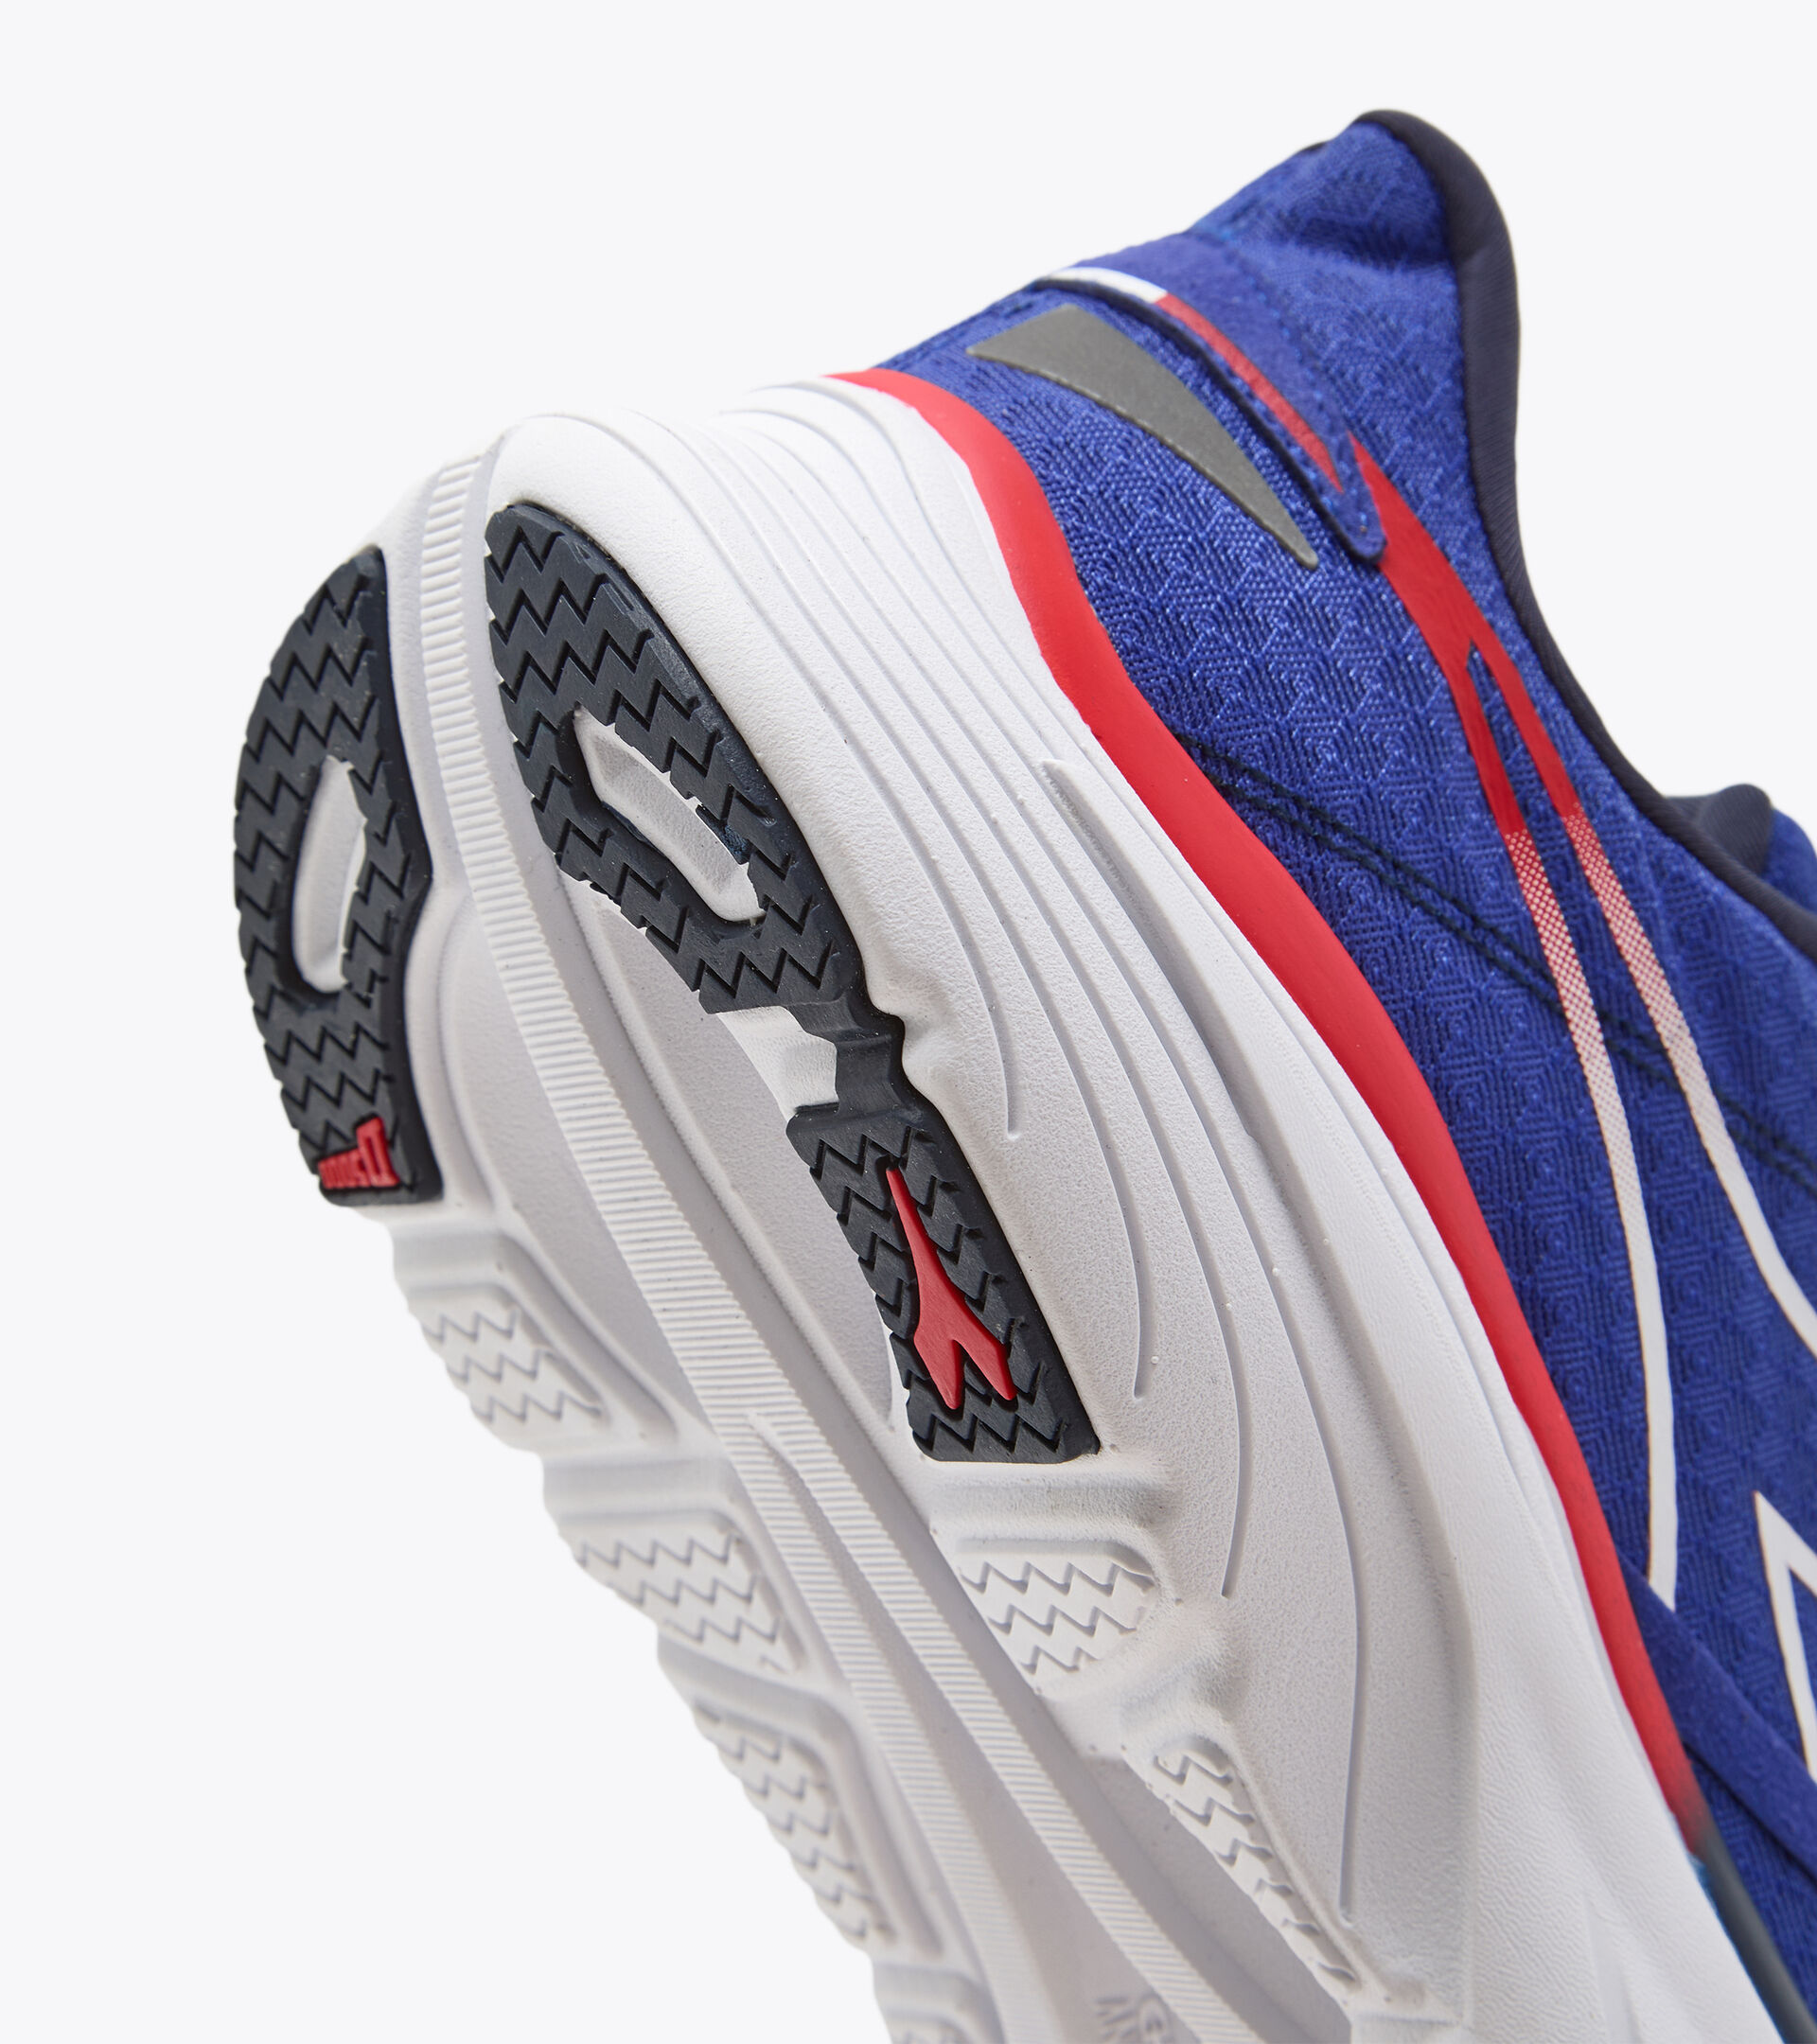 Running shoes - Men EQUIPE NUCLEO SURF THE WEB/WHITE/FIERY RED - Diadora